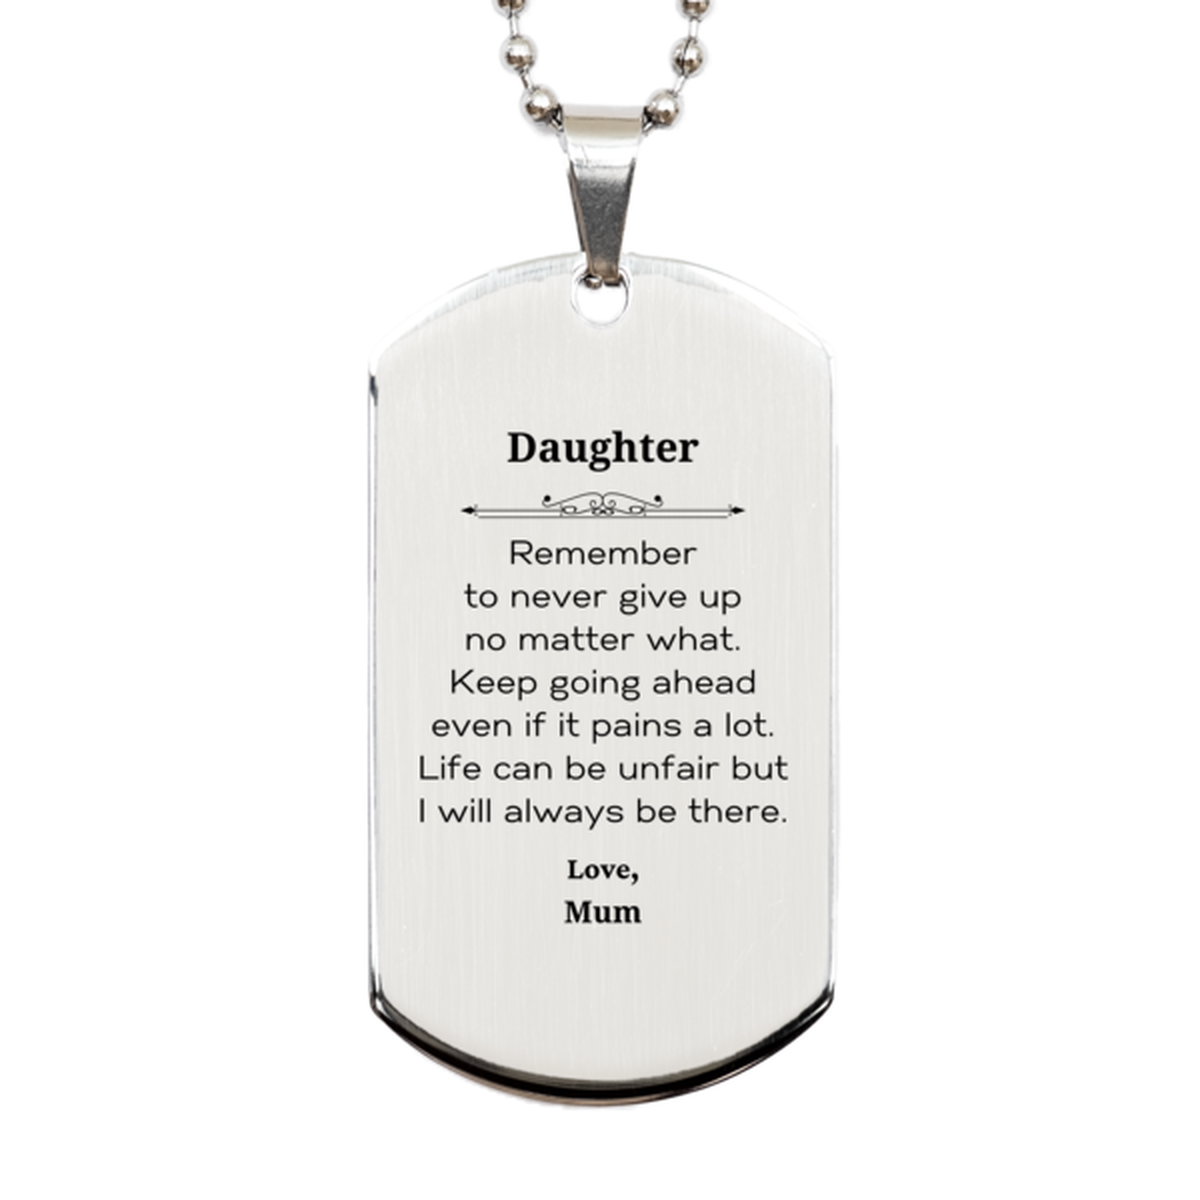 Daughter Motivational Gifts from Mum, Remember to never give up no matter what, Inspirational Birthday Silver Dog Tag for Daughter